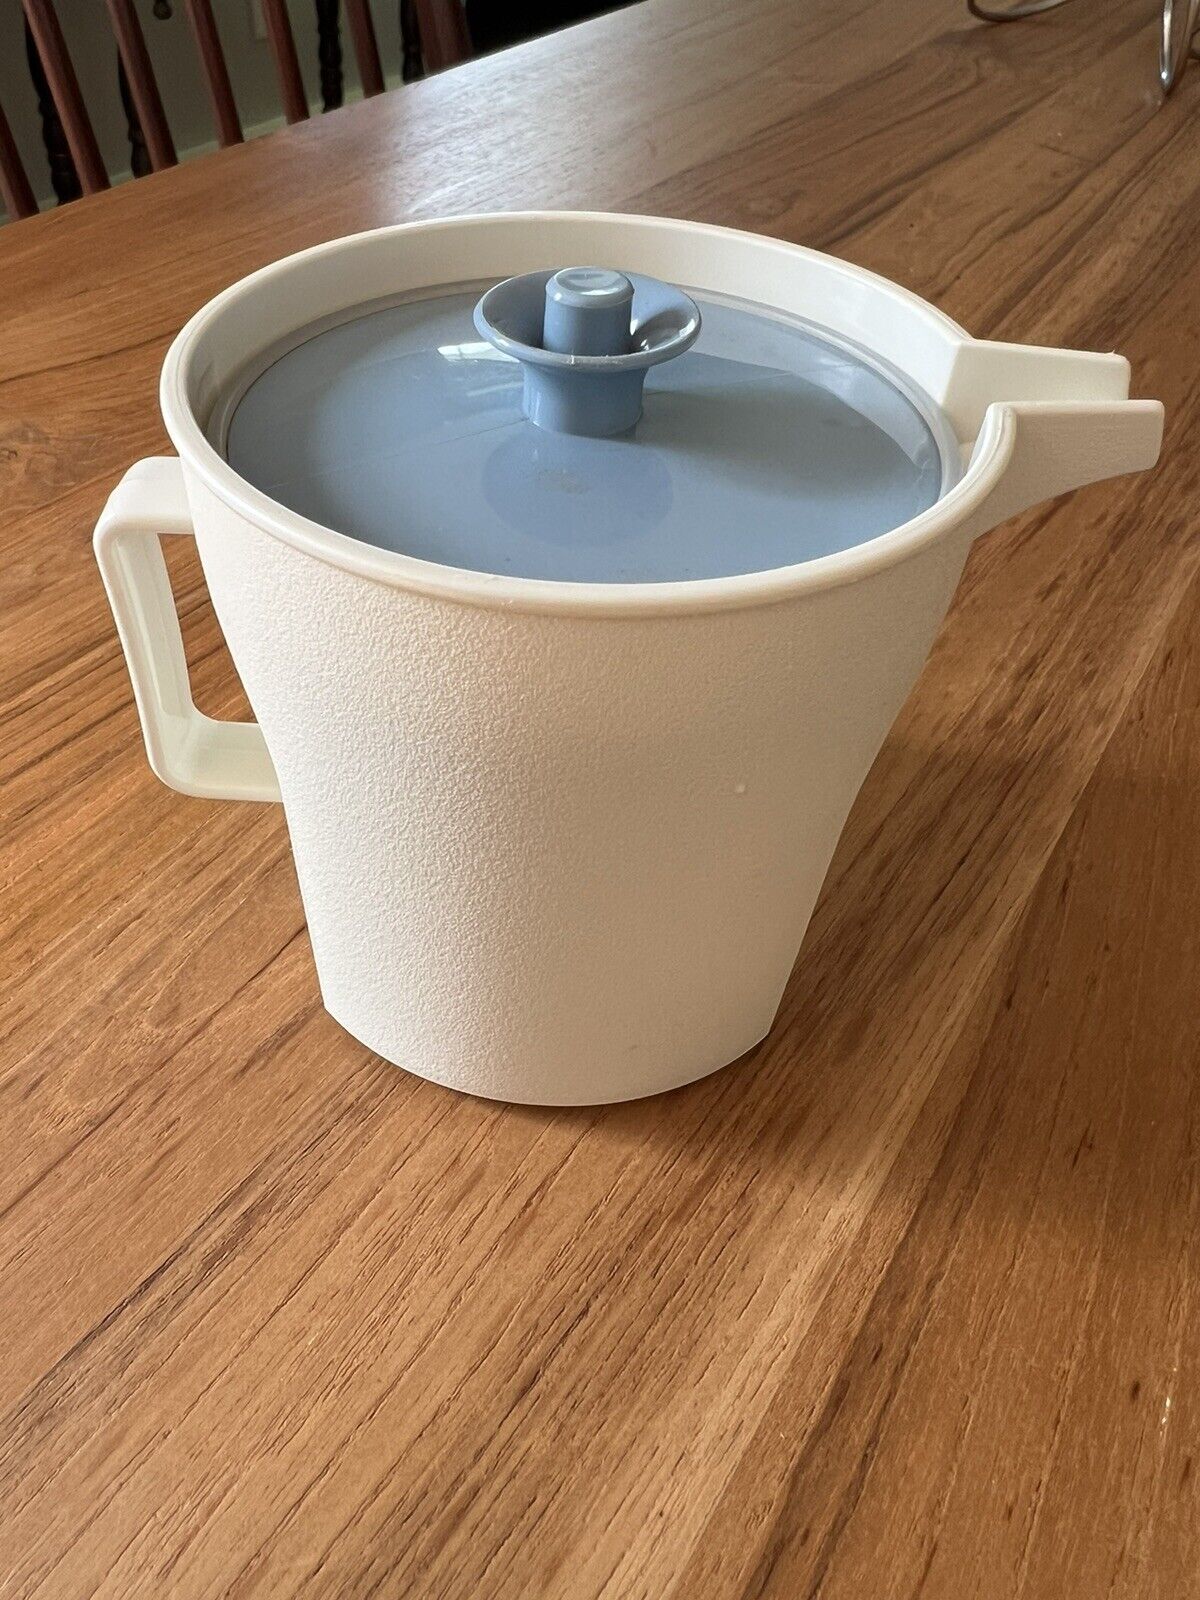 Vintage Tupperware Off White Creamer Pitcher #1414-2 With Blue Lid